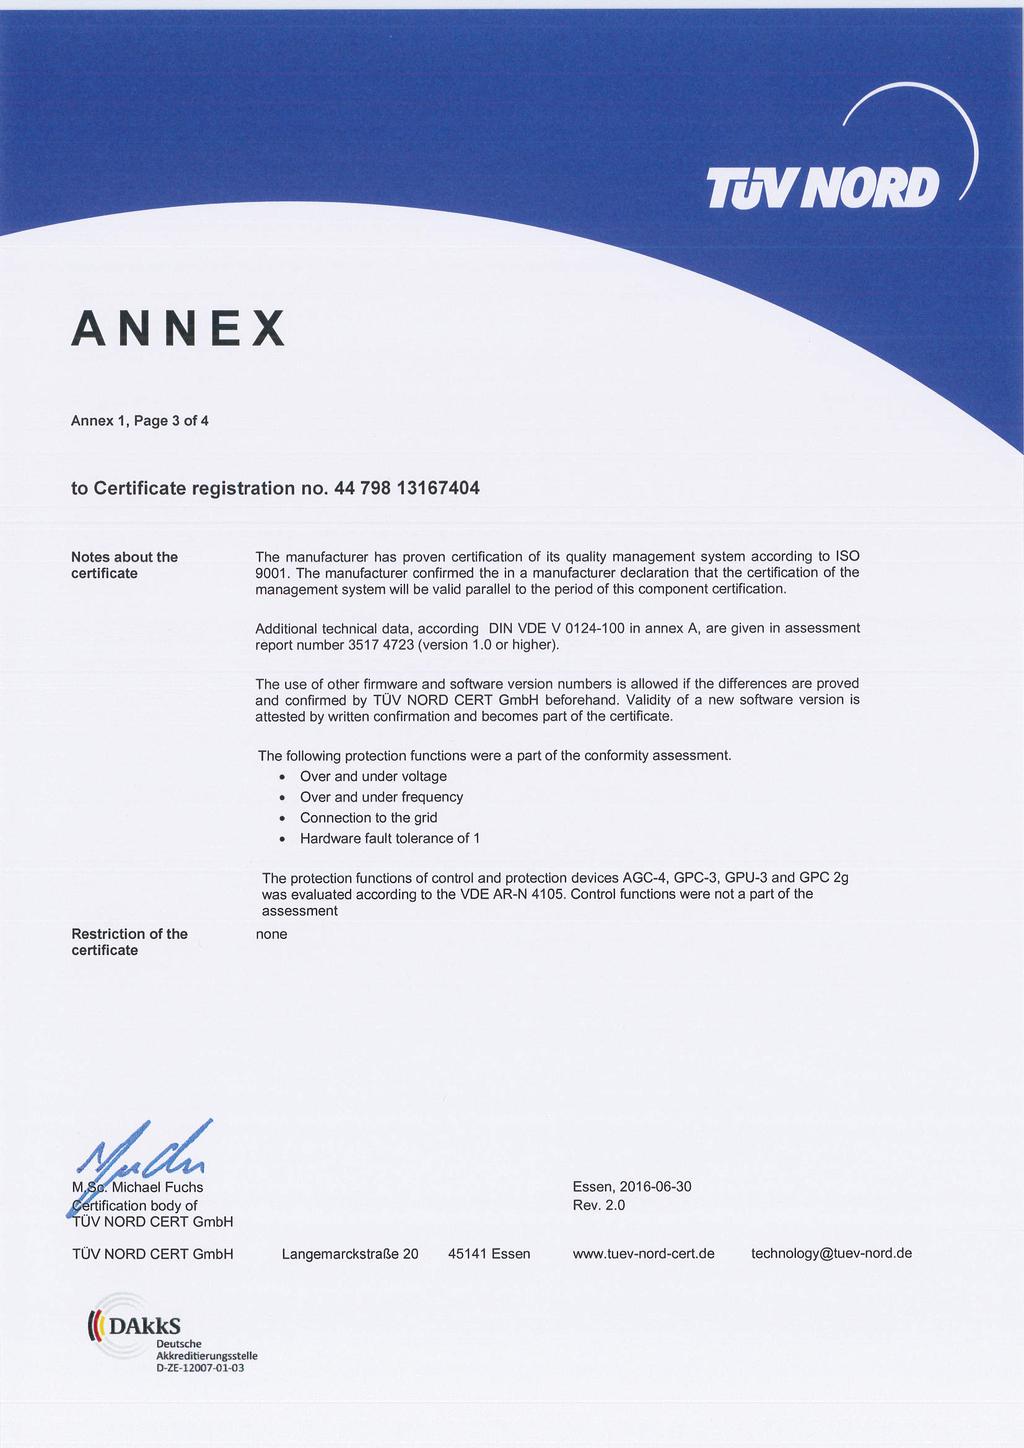 TuV NOIC) ) ANNEX Annex 1, Page 3 of 4 Notes about the certificate The manufacturer has proven certification of its quality management system according to ISO 9001.